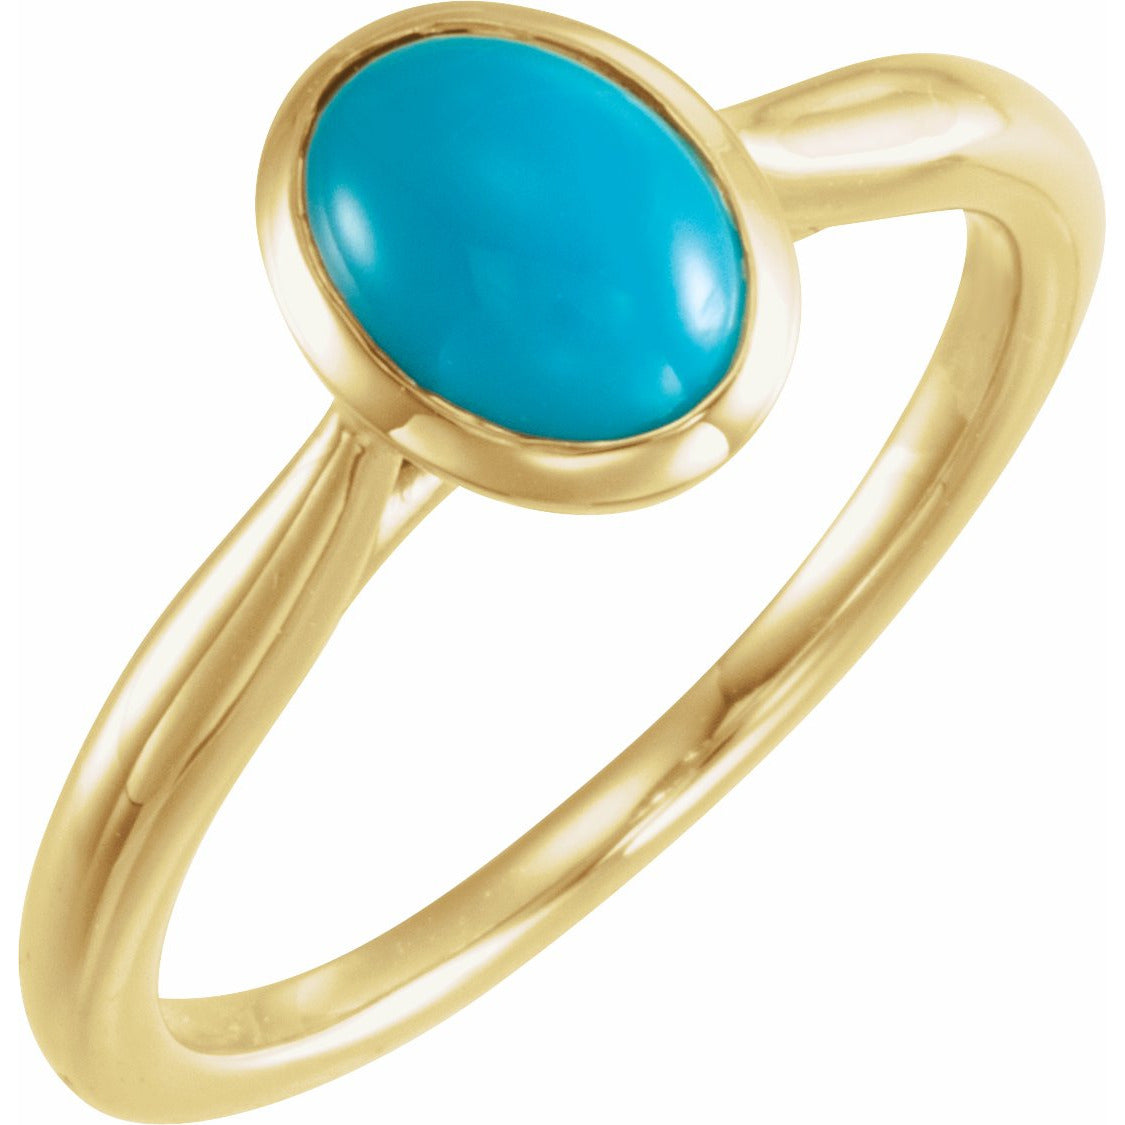 14K Yellow 8x6 mm Oval Cabochon Turquoise Ring